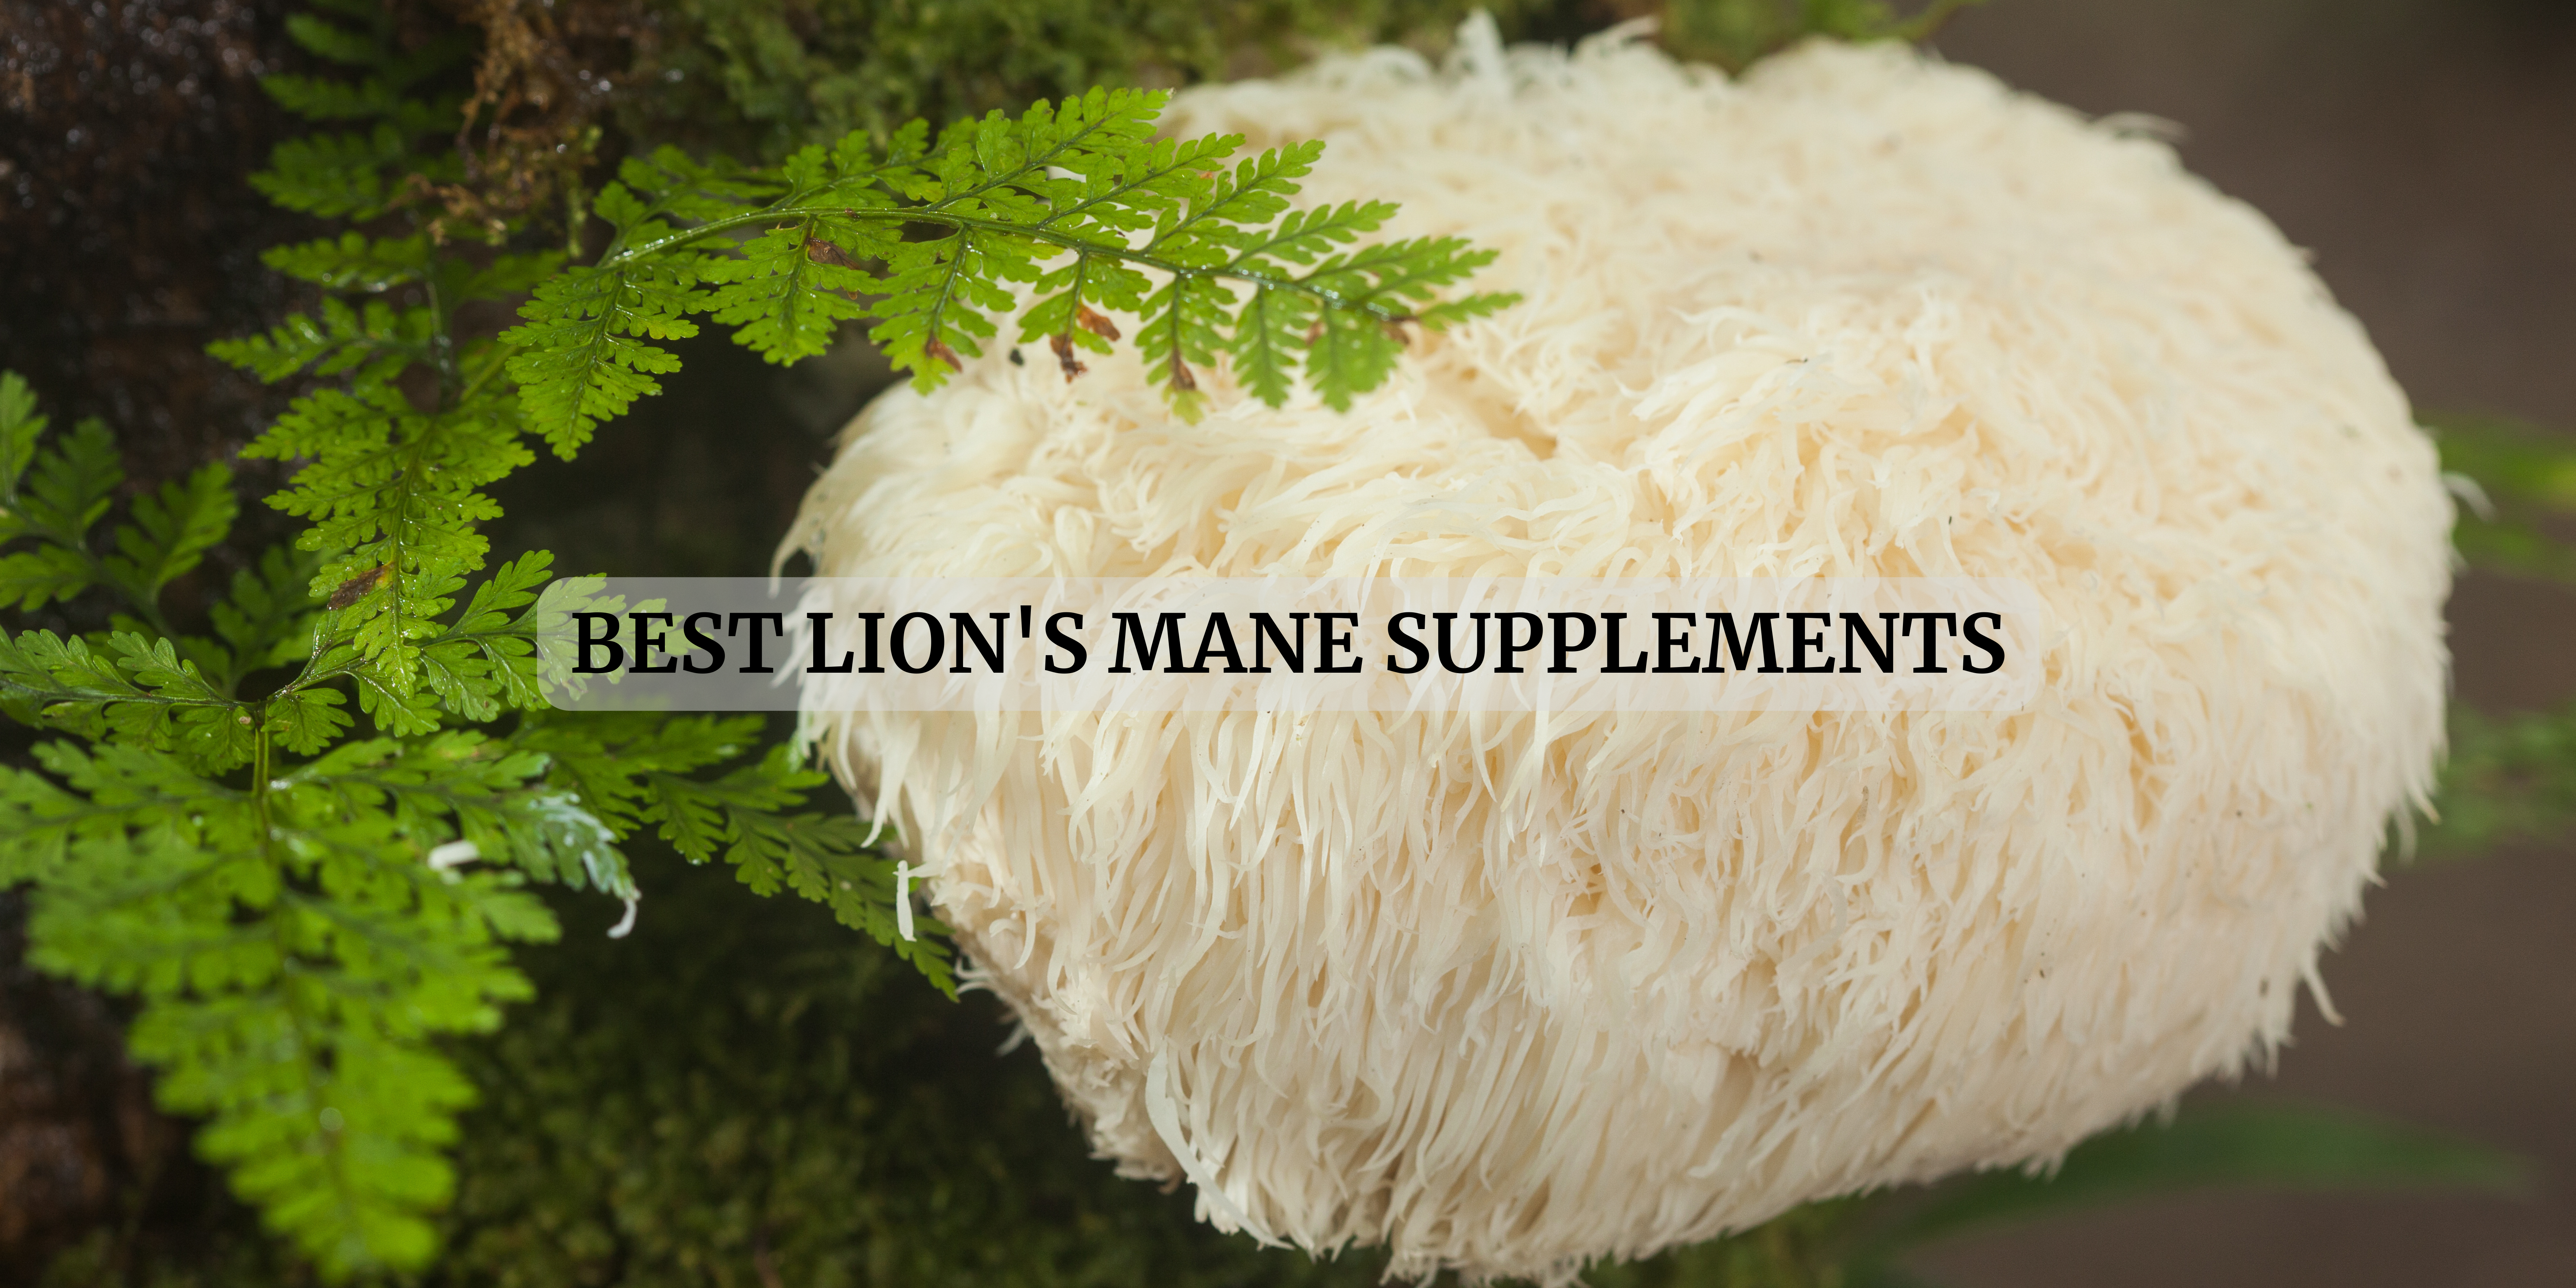 lion's mane supplements in USA